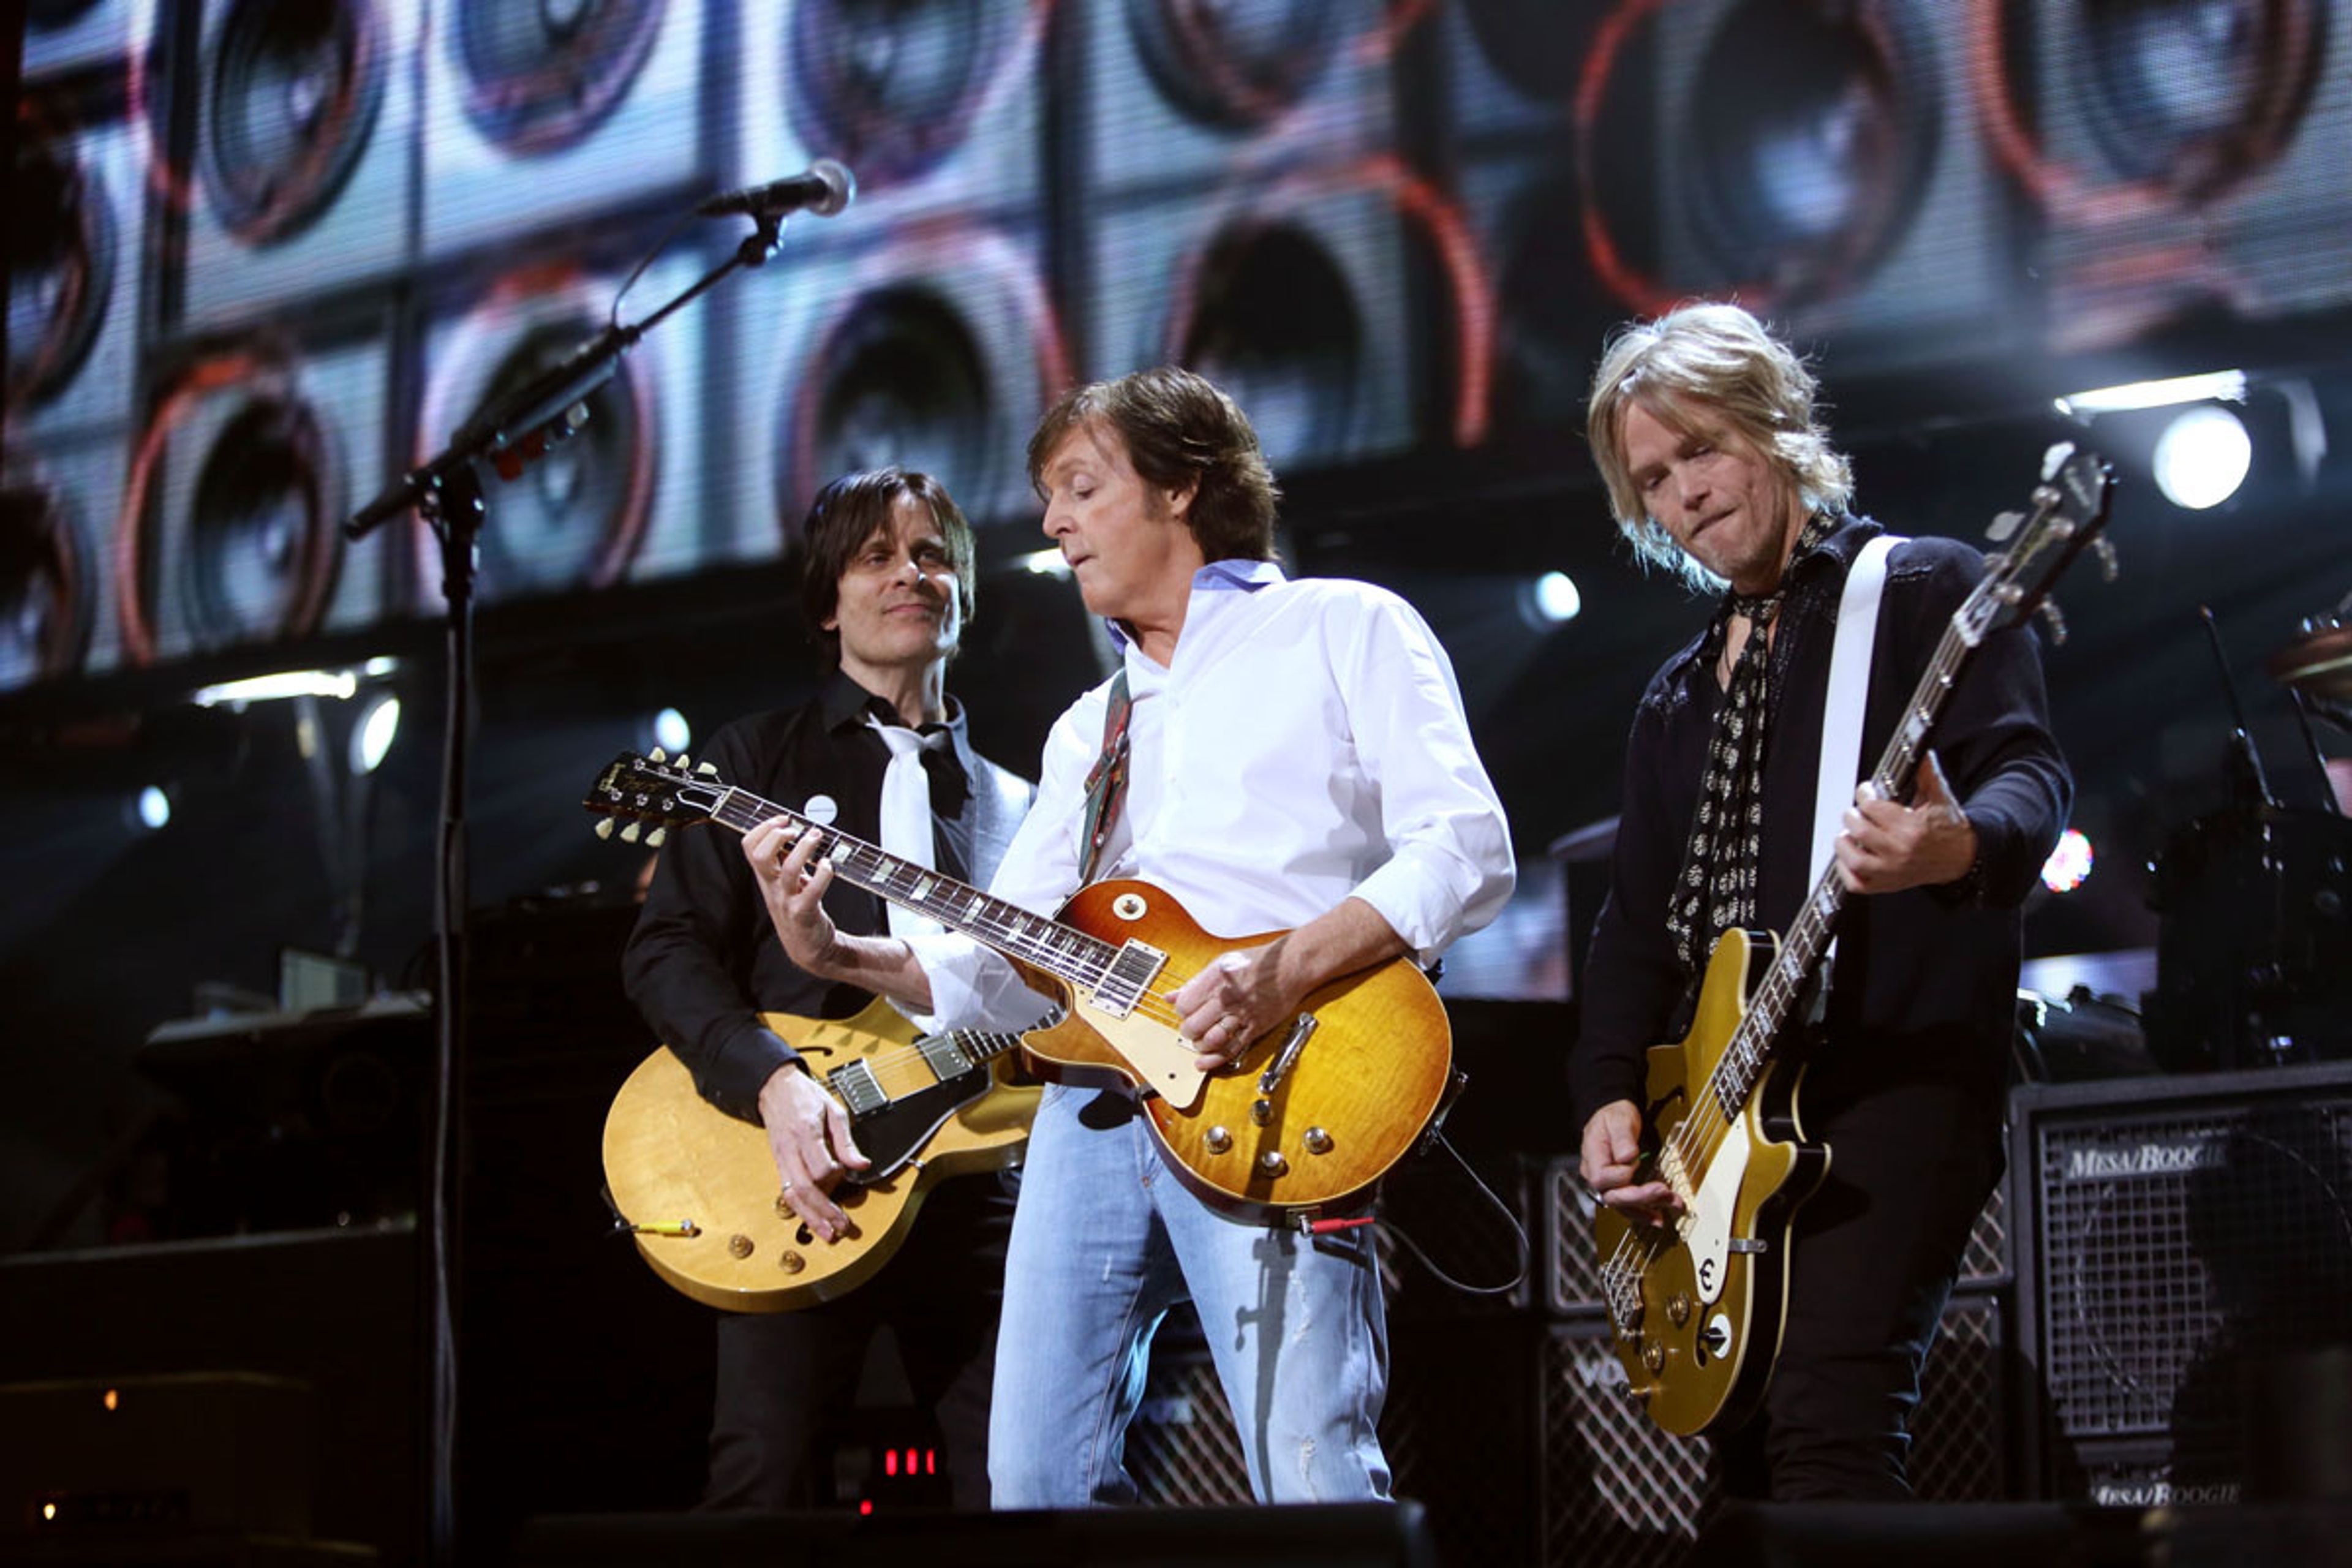 Rusty, Paul and Brian on stage, 12-12-12 Hurricane Sandy Benefit, Madison Square Garden, NYC, 12th December 2012